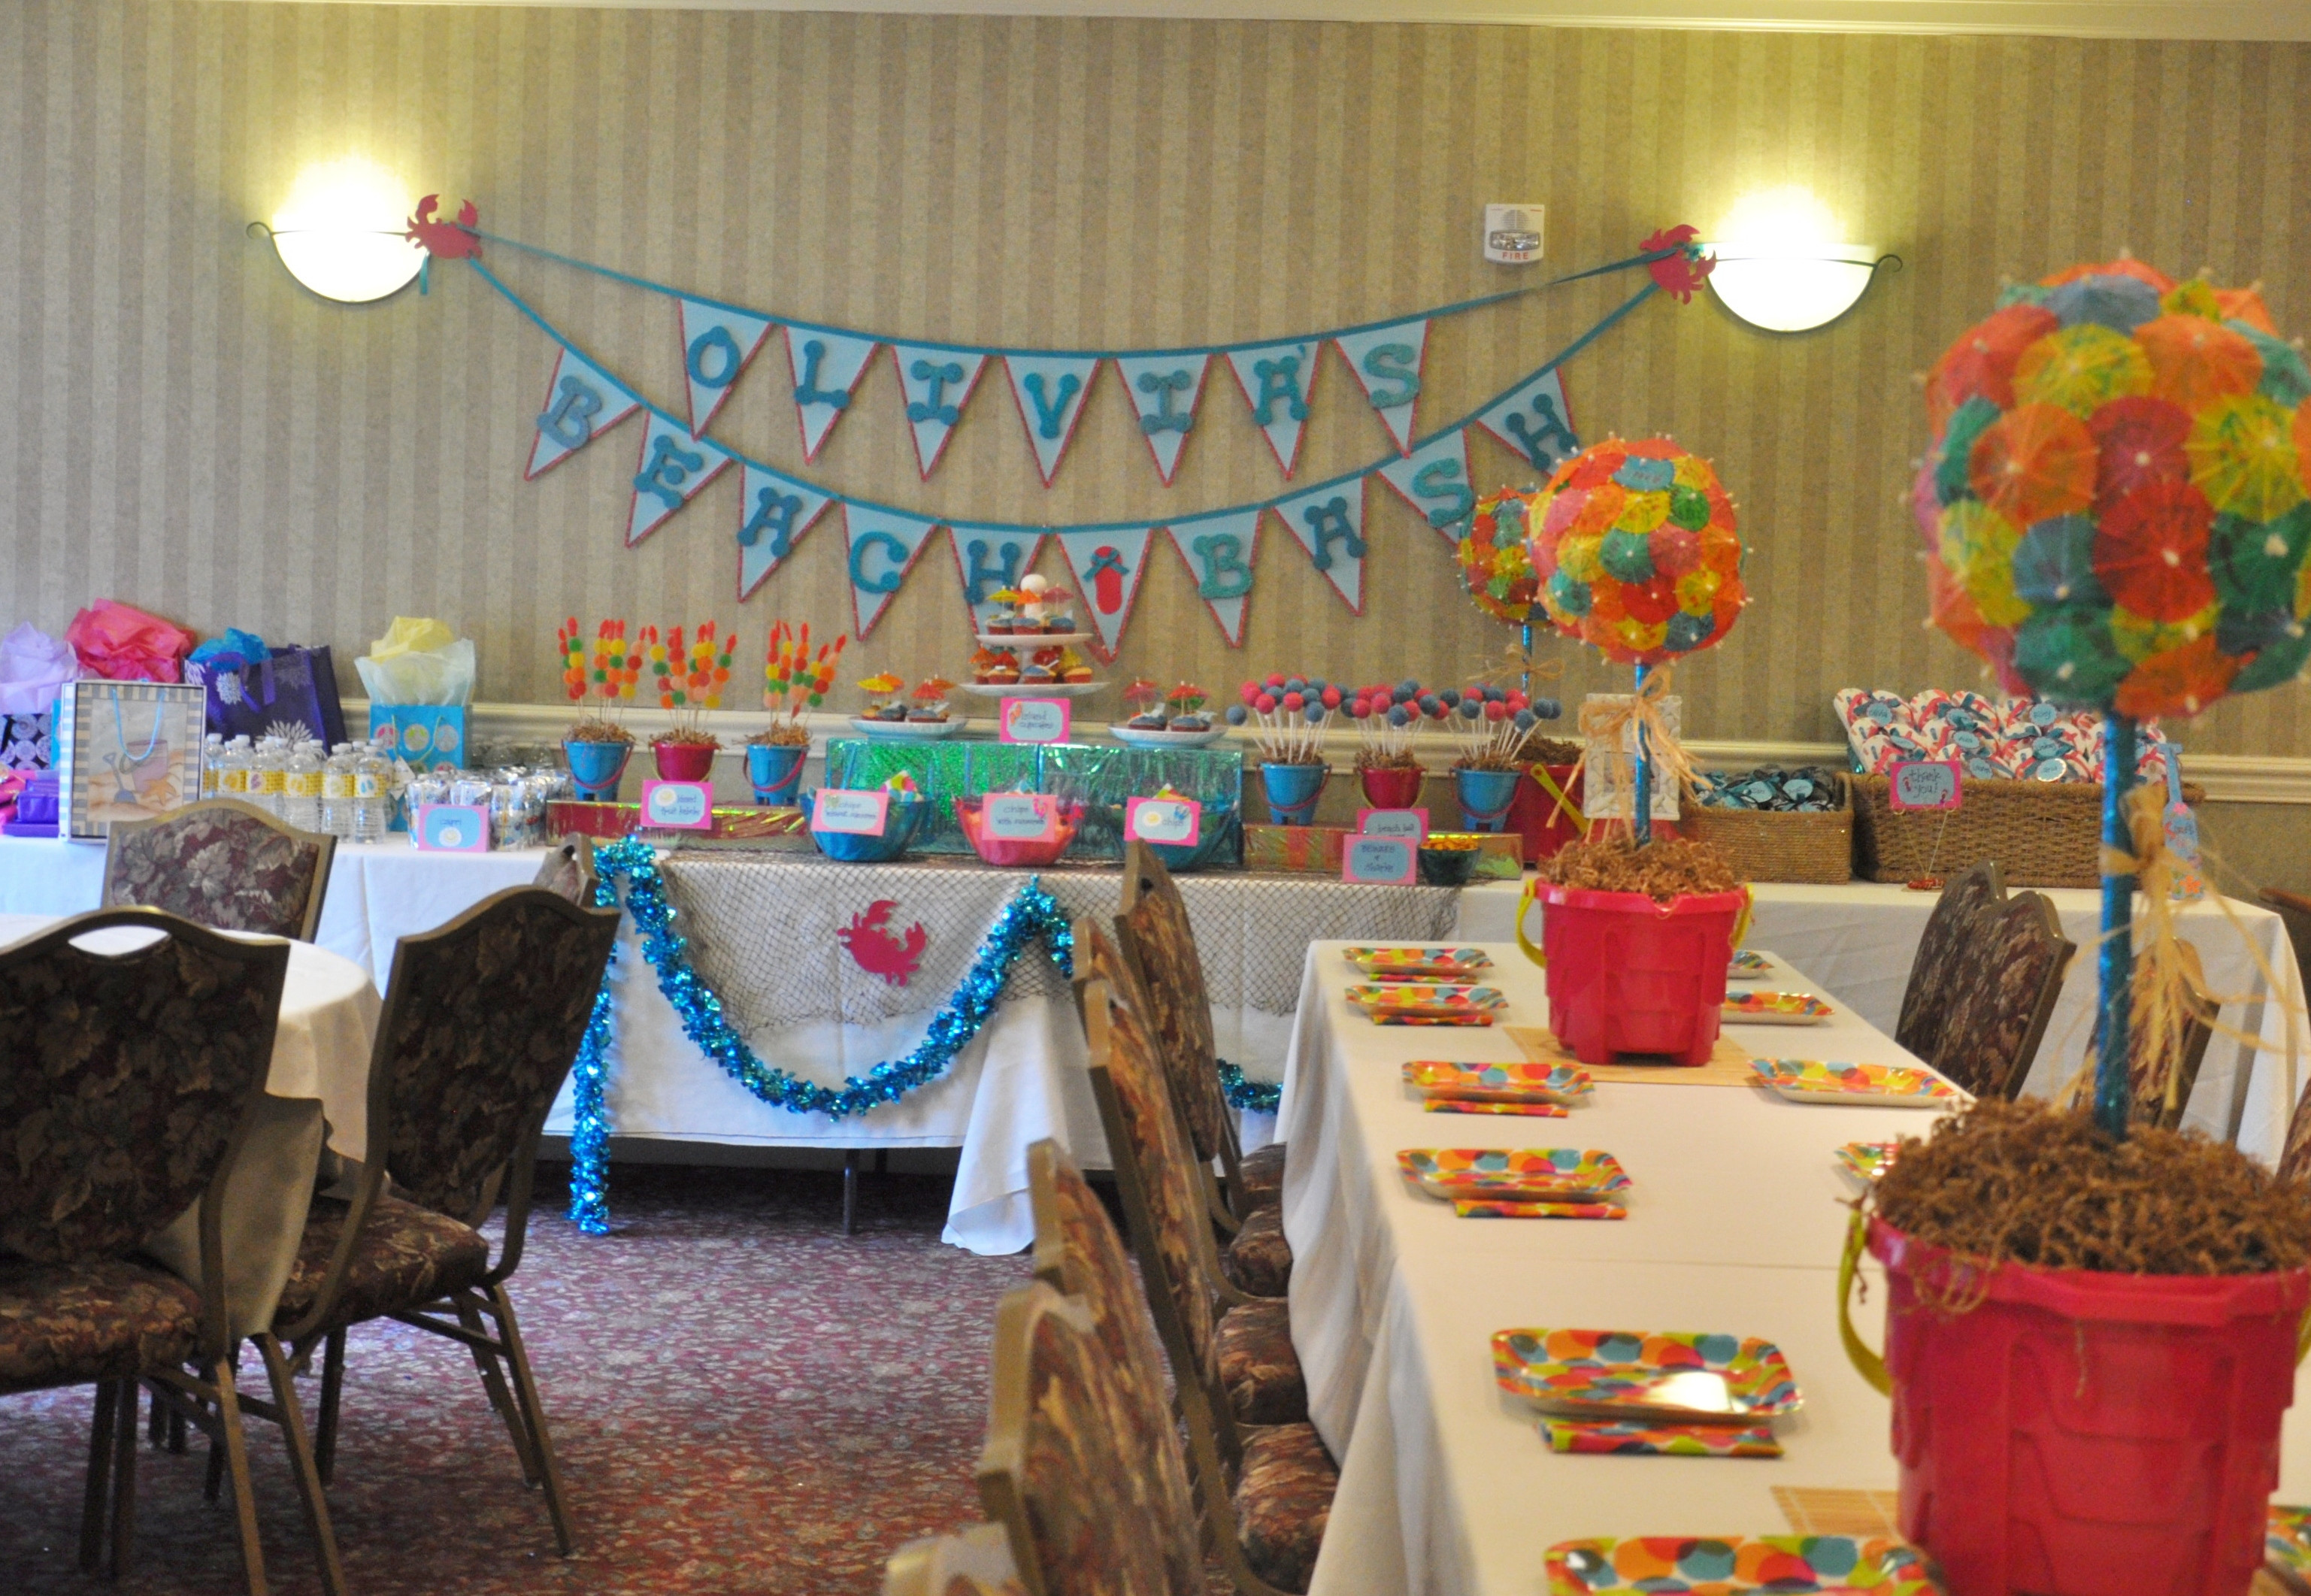 Indoor Beach Party Decorating Ideas
 Beach Bash Indoor Pool Party